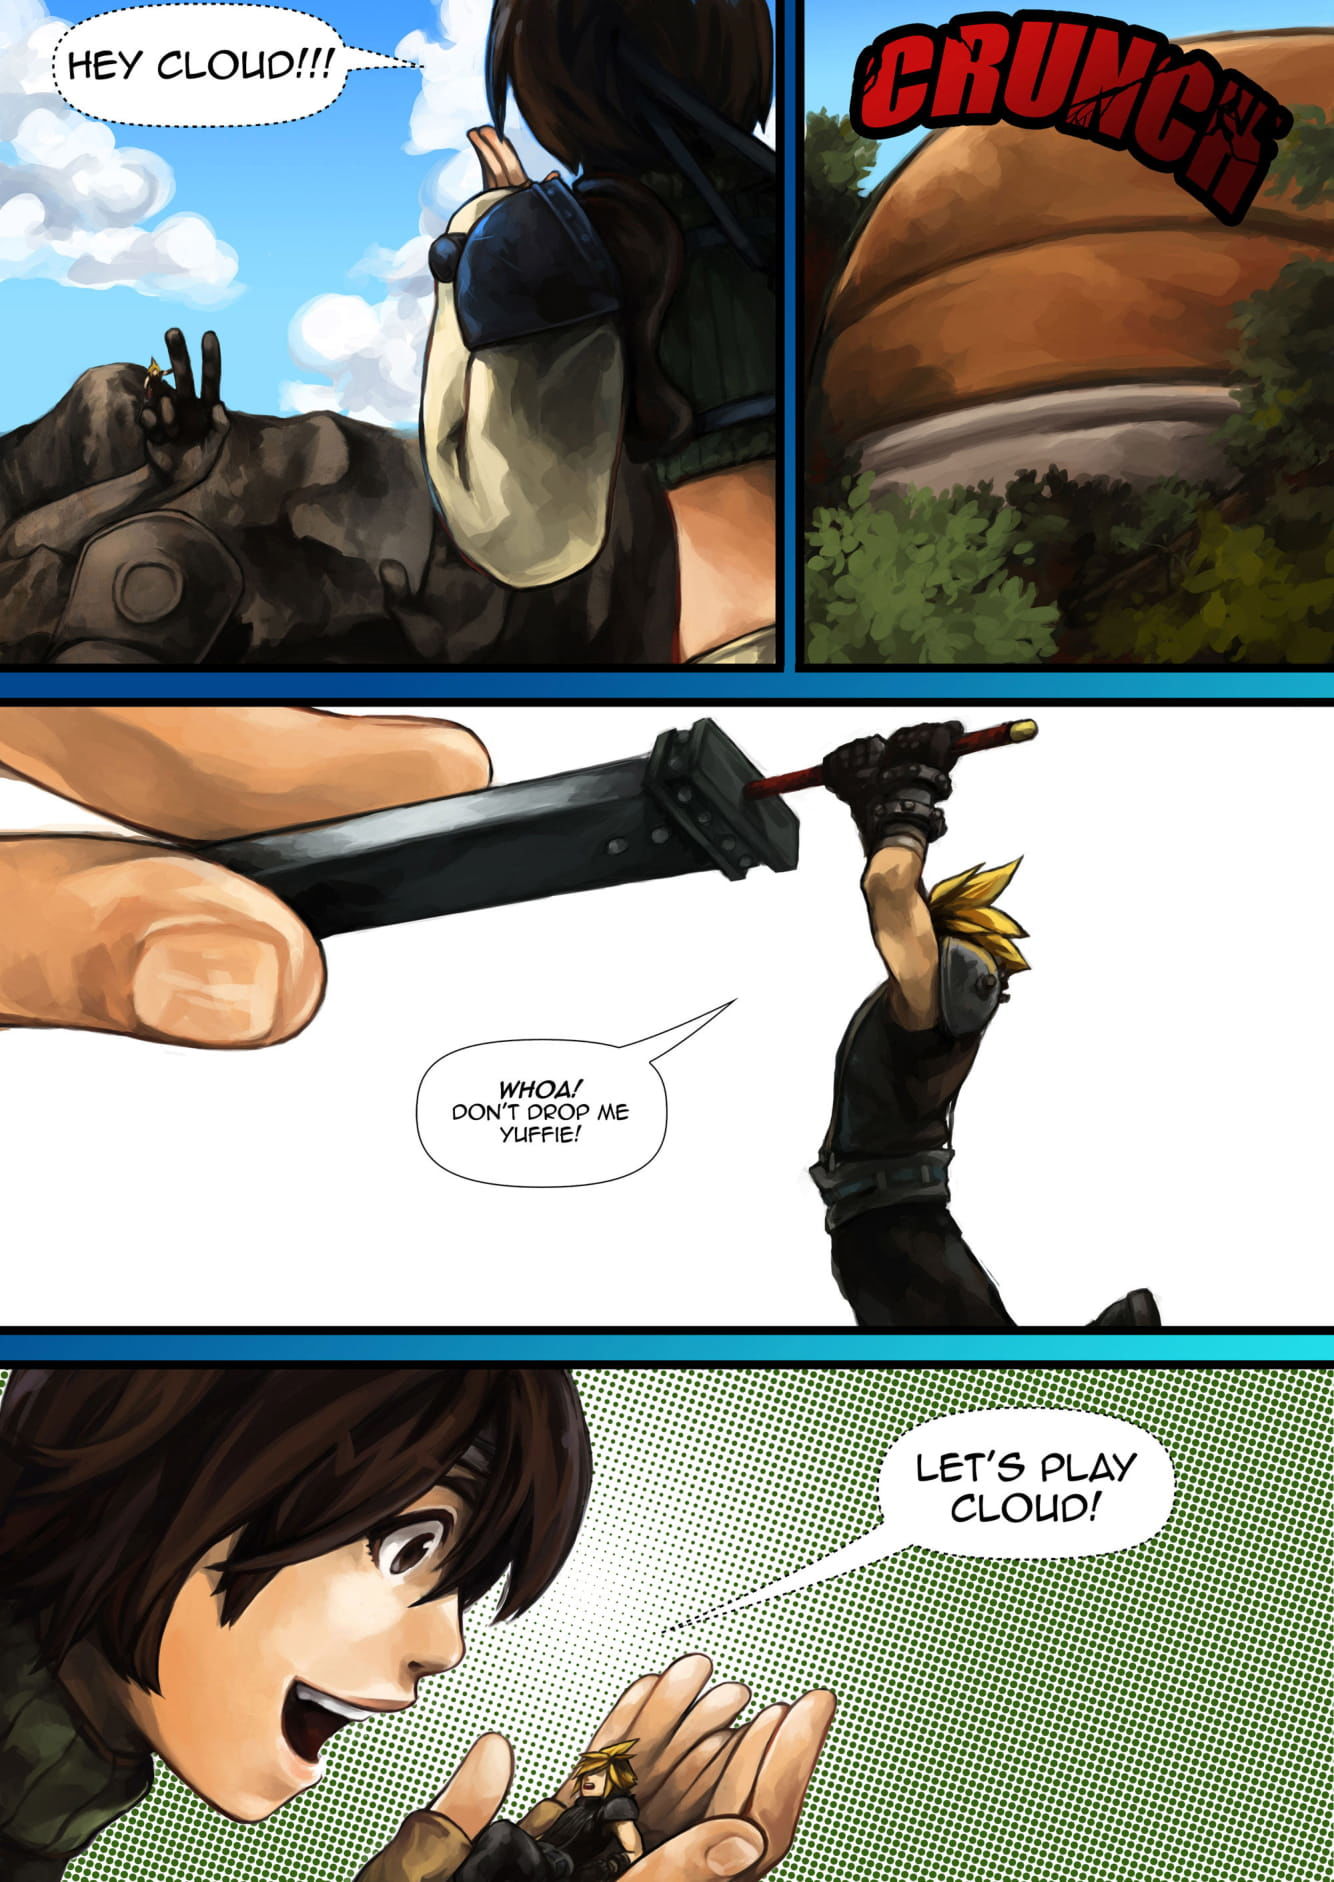 Growth Materia 1 & 2 by GiantessFan page 6